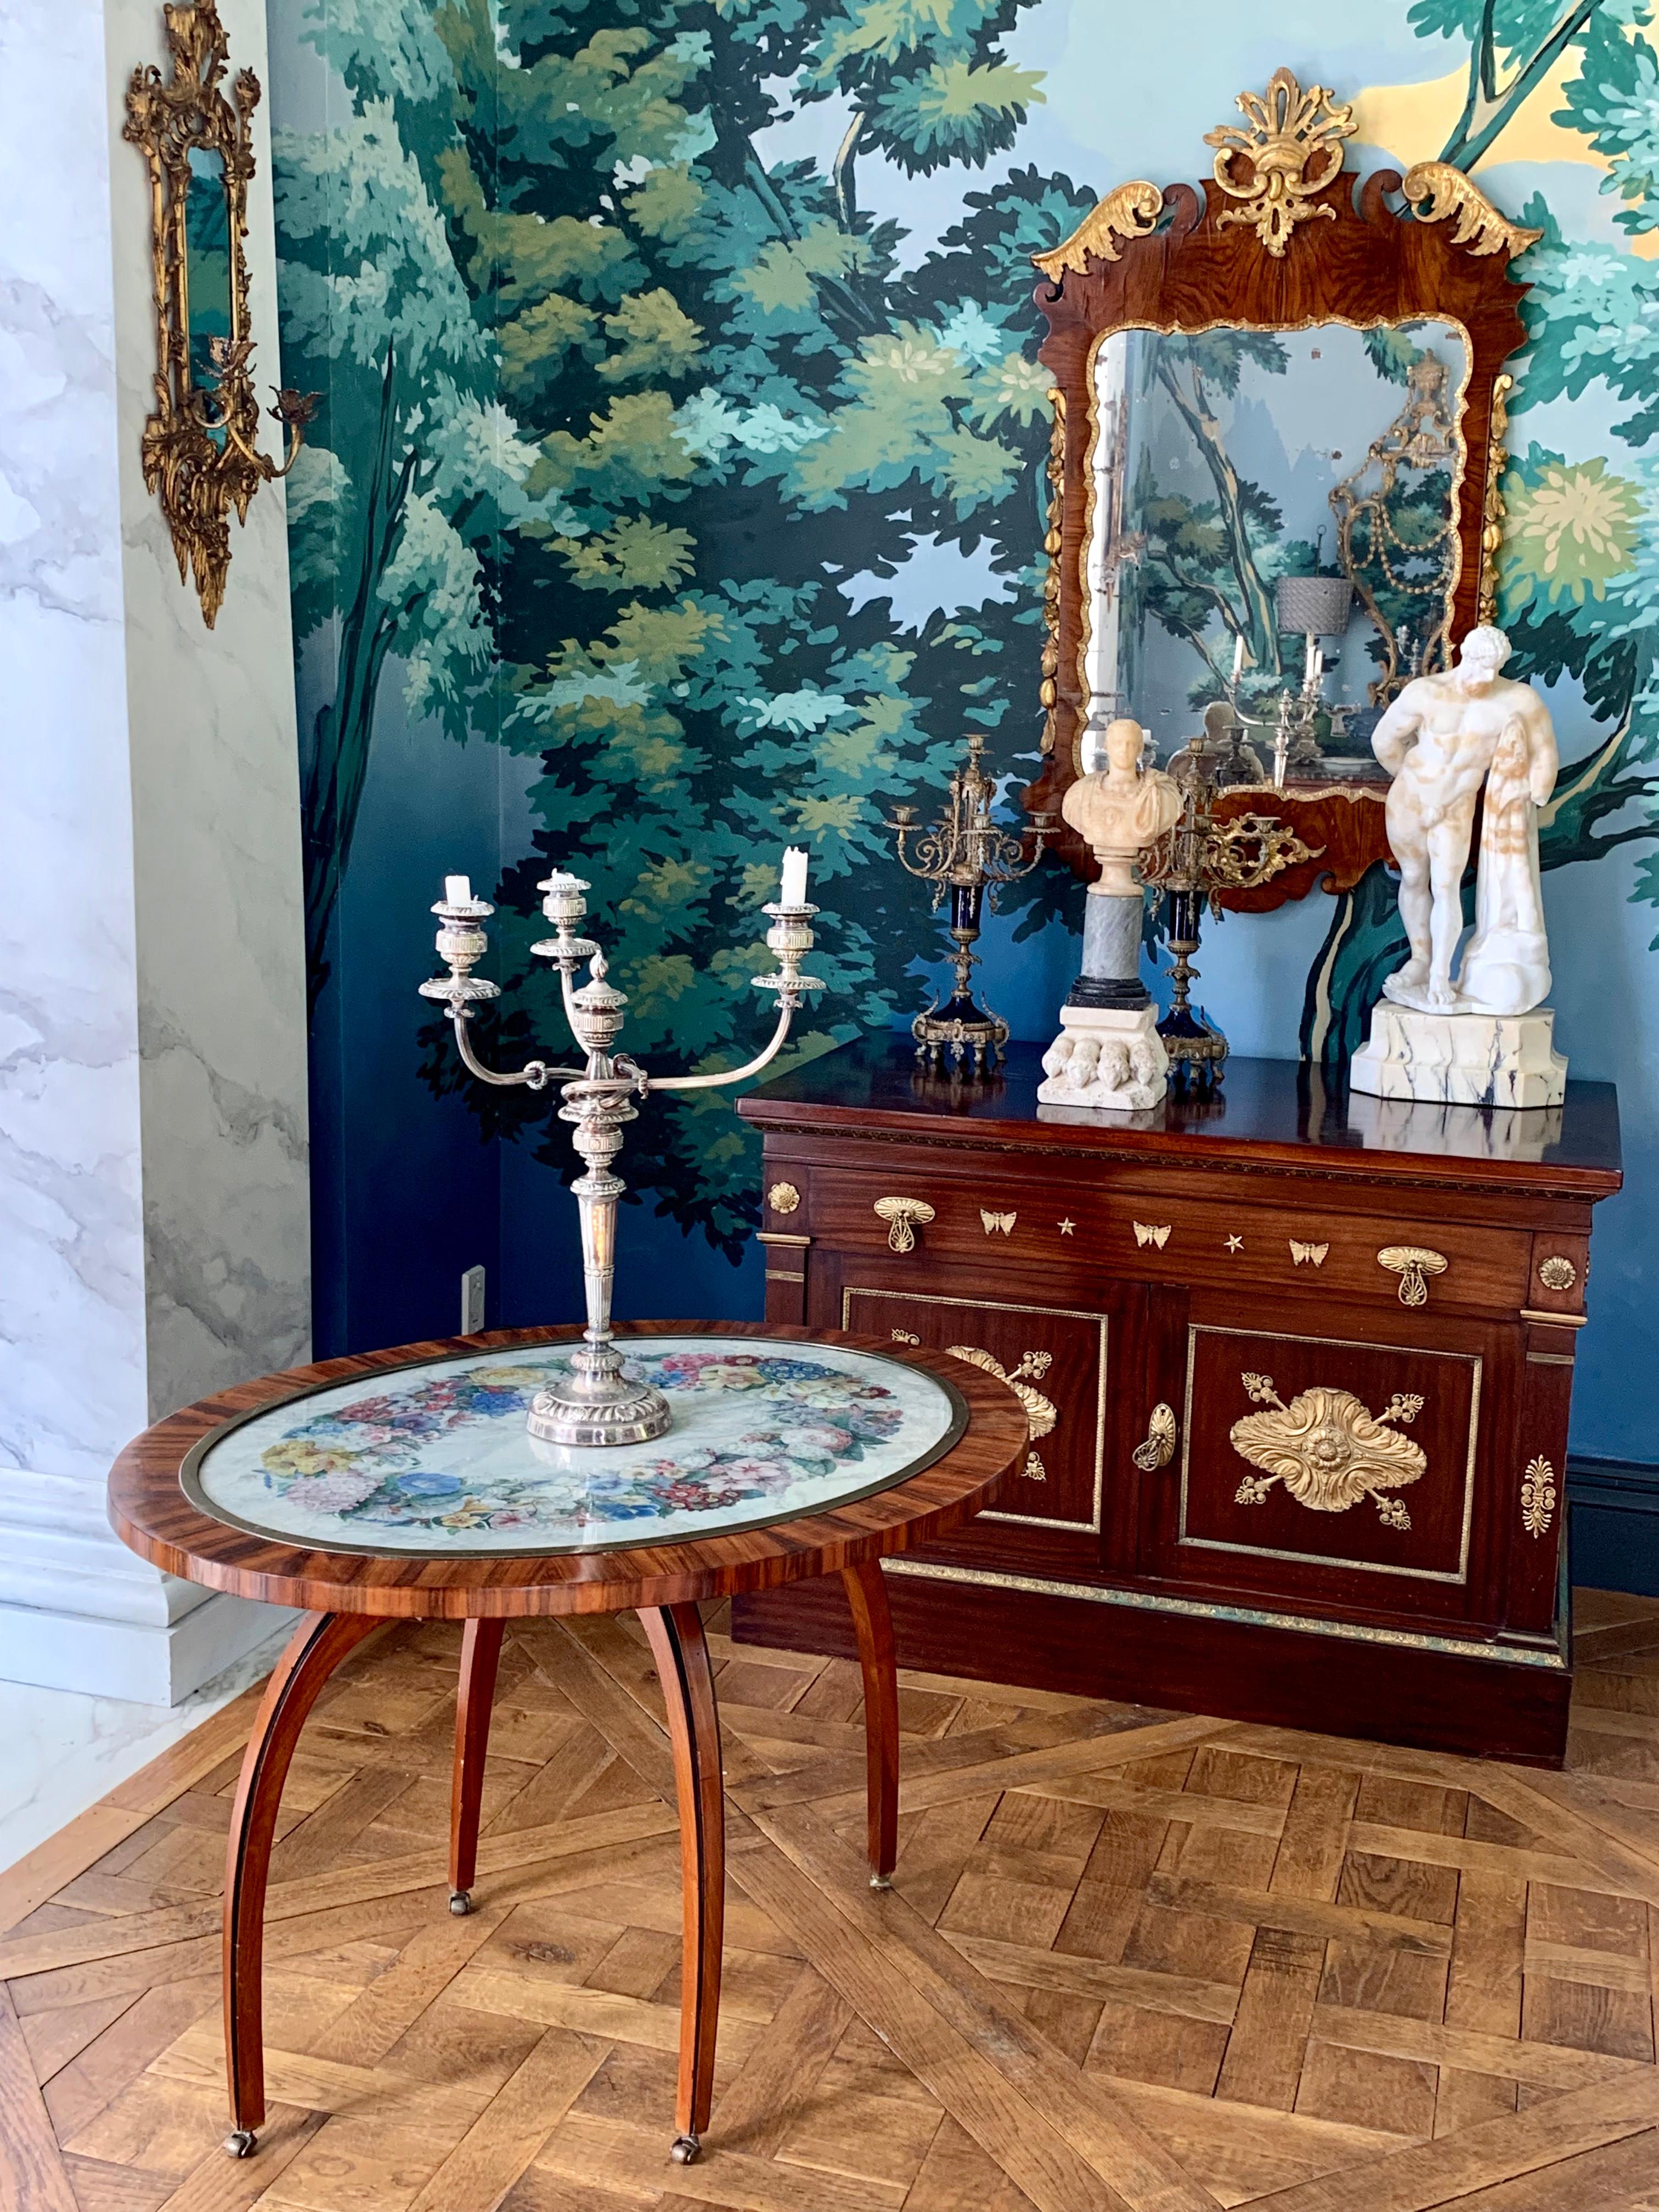 This beautiful kingwood side table has a hand-painted floral wreath and is protected under a glass and is framed in brass.